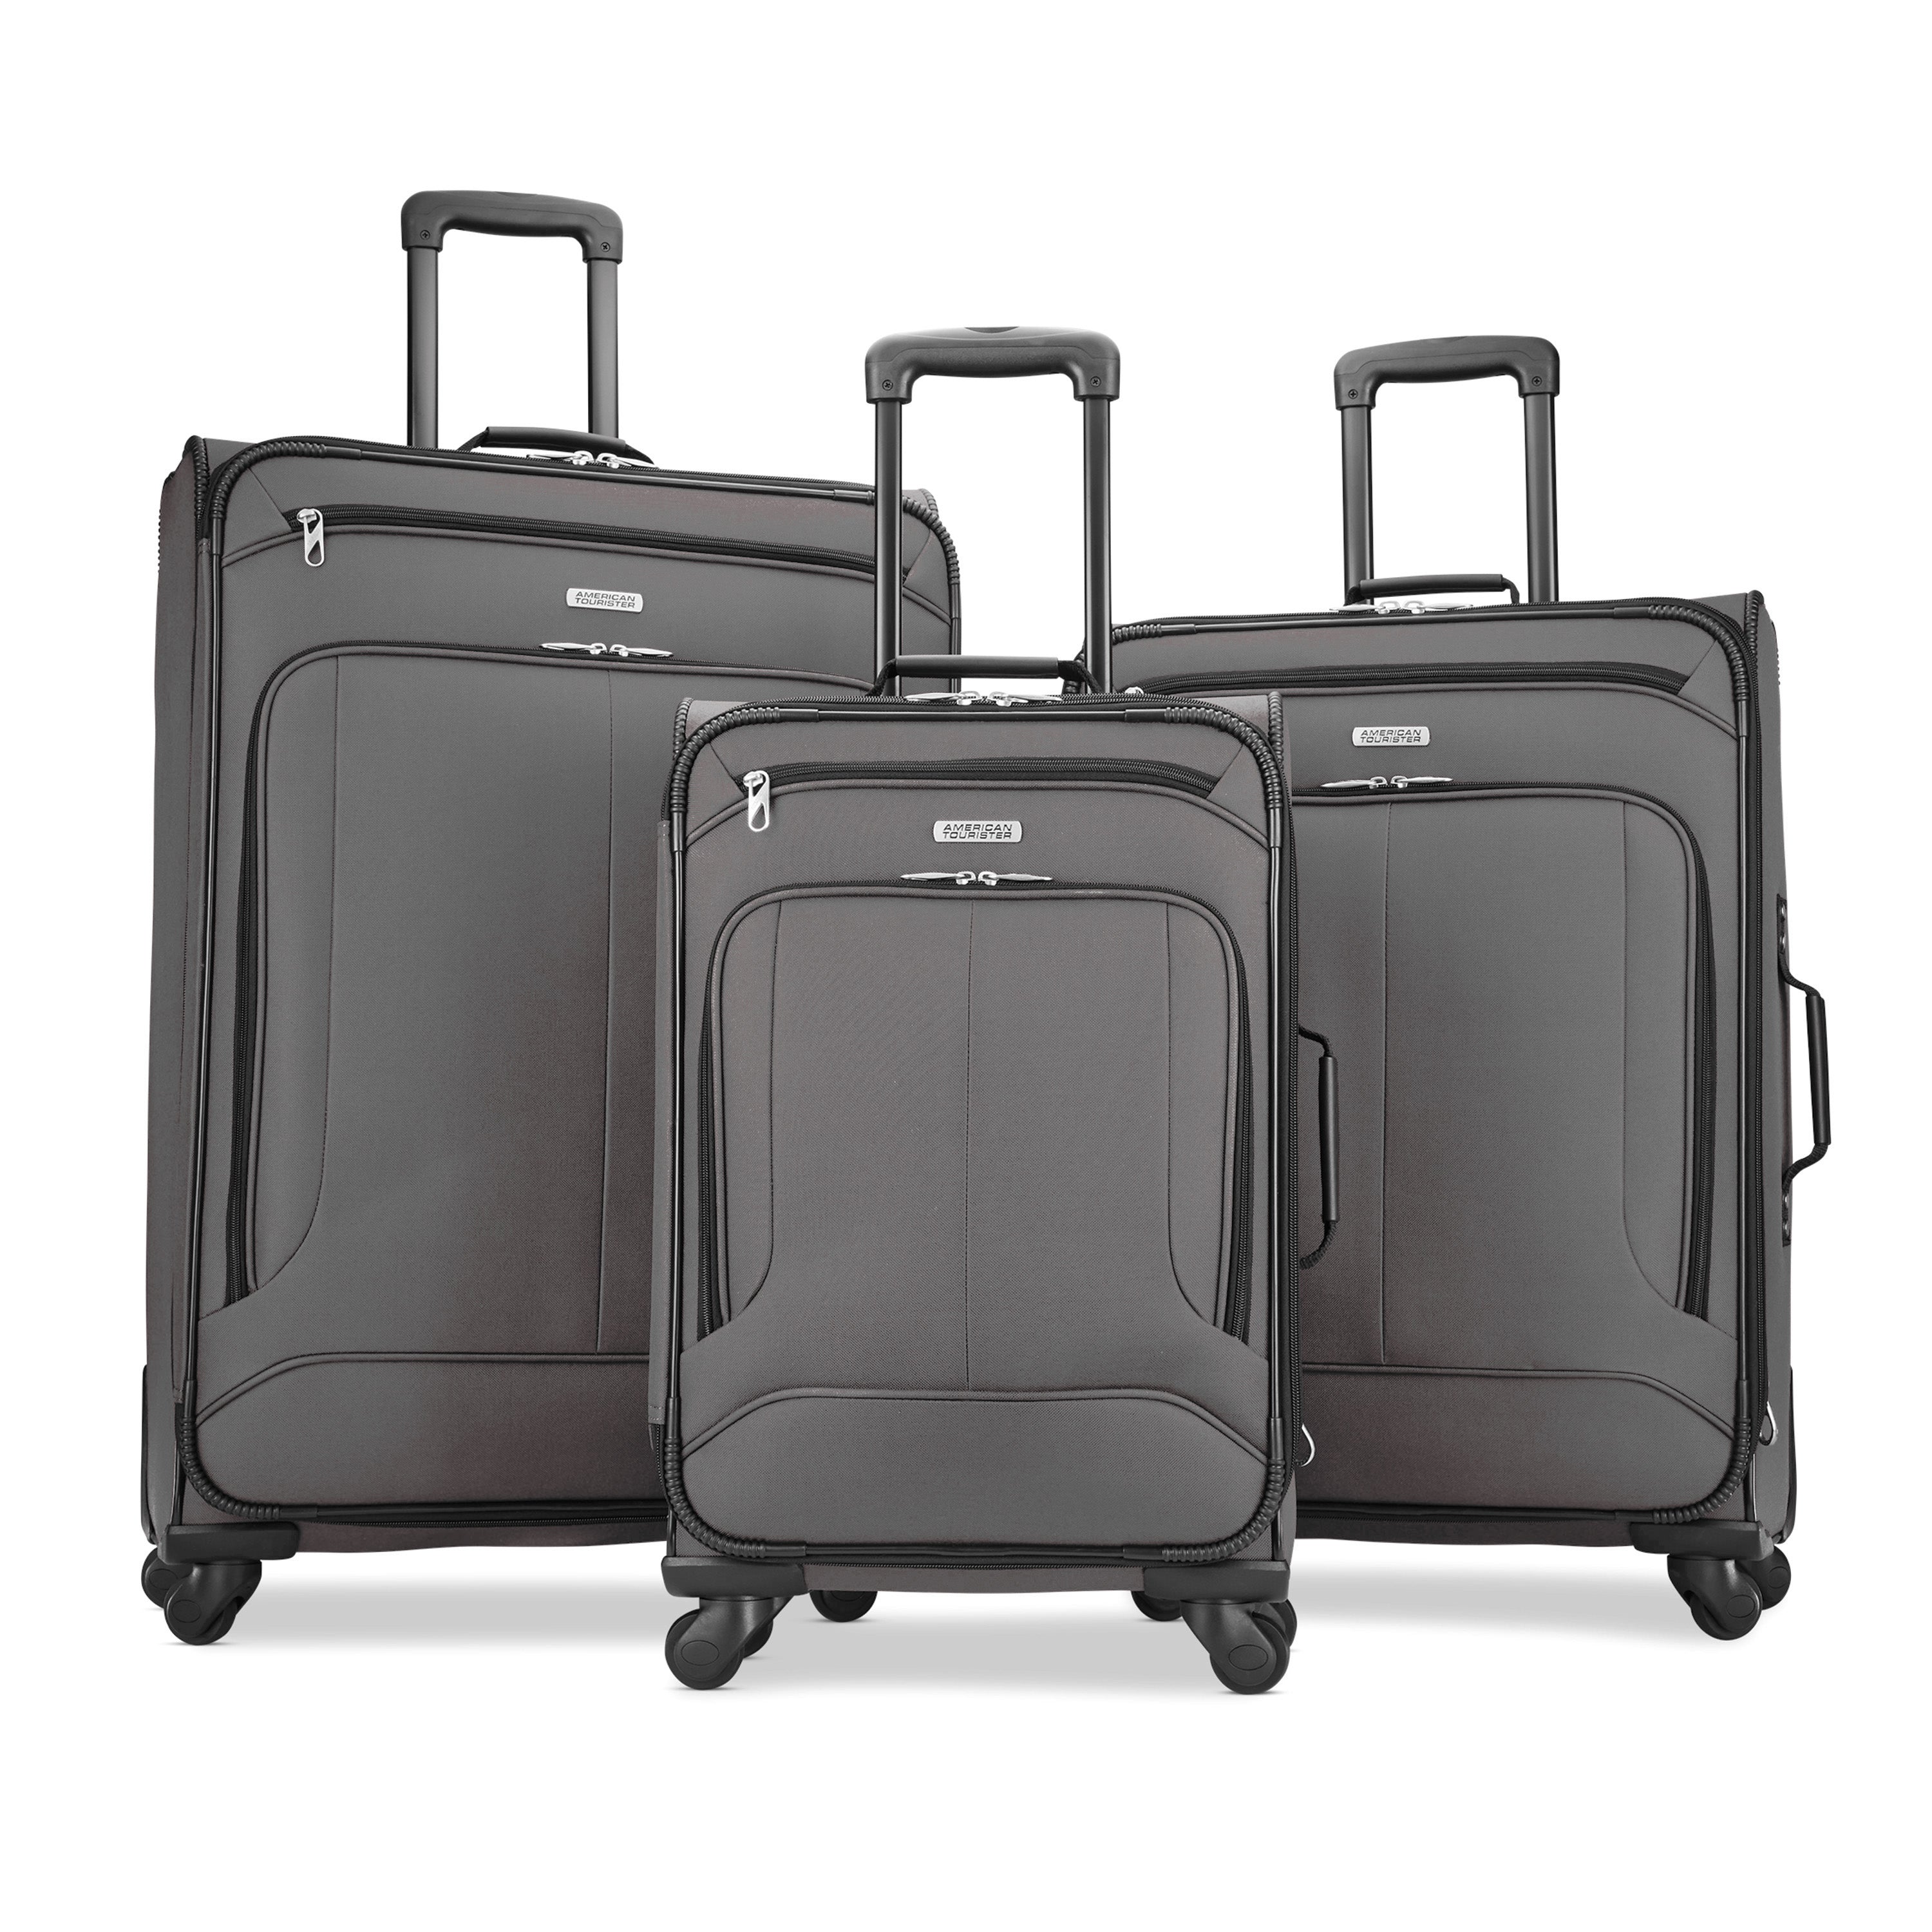 Buy Citizen Journey Pulse Trolley Bag for Travel Set of 3 (57 cm Small, 68  cm Medium & 78 cm Large) Luggage Bag | Polyester Soft Suitcase for Travel  with 4 Wheels